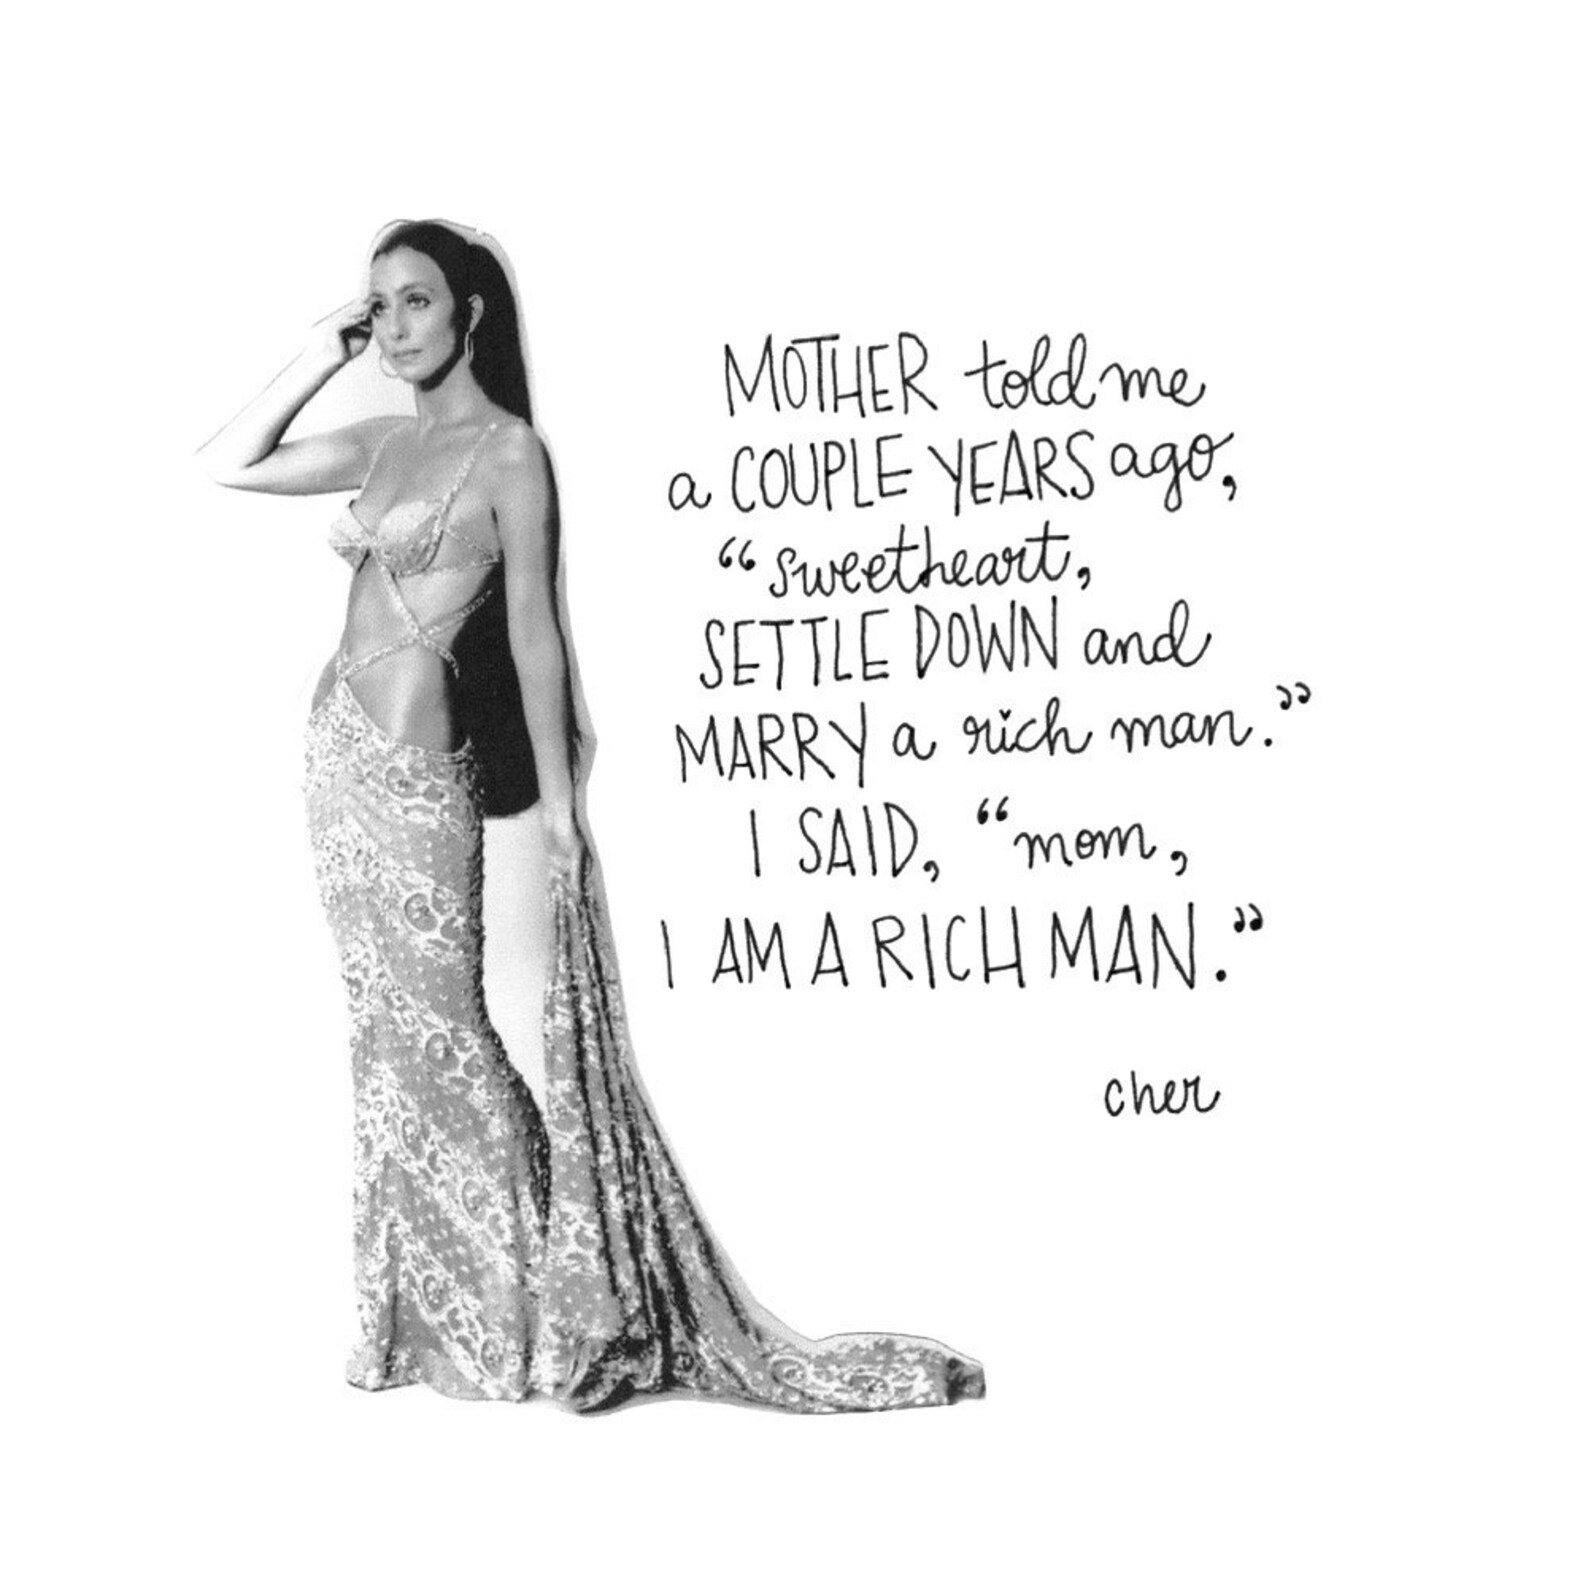 Cher rich man quote